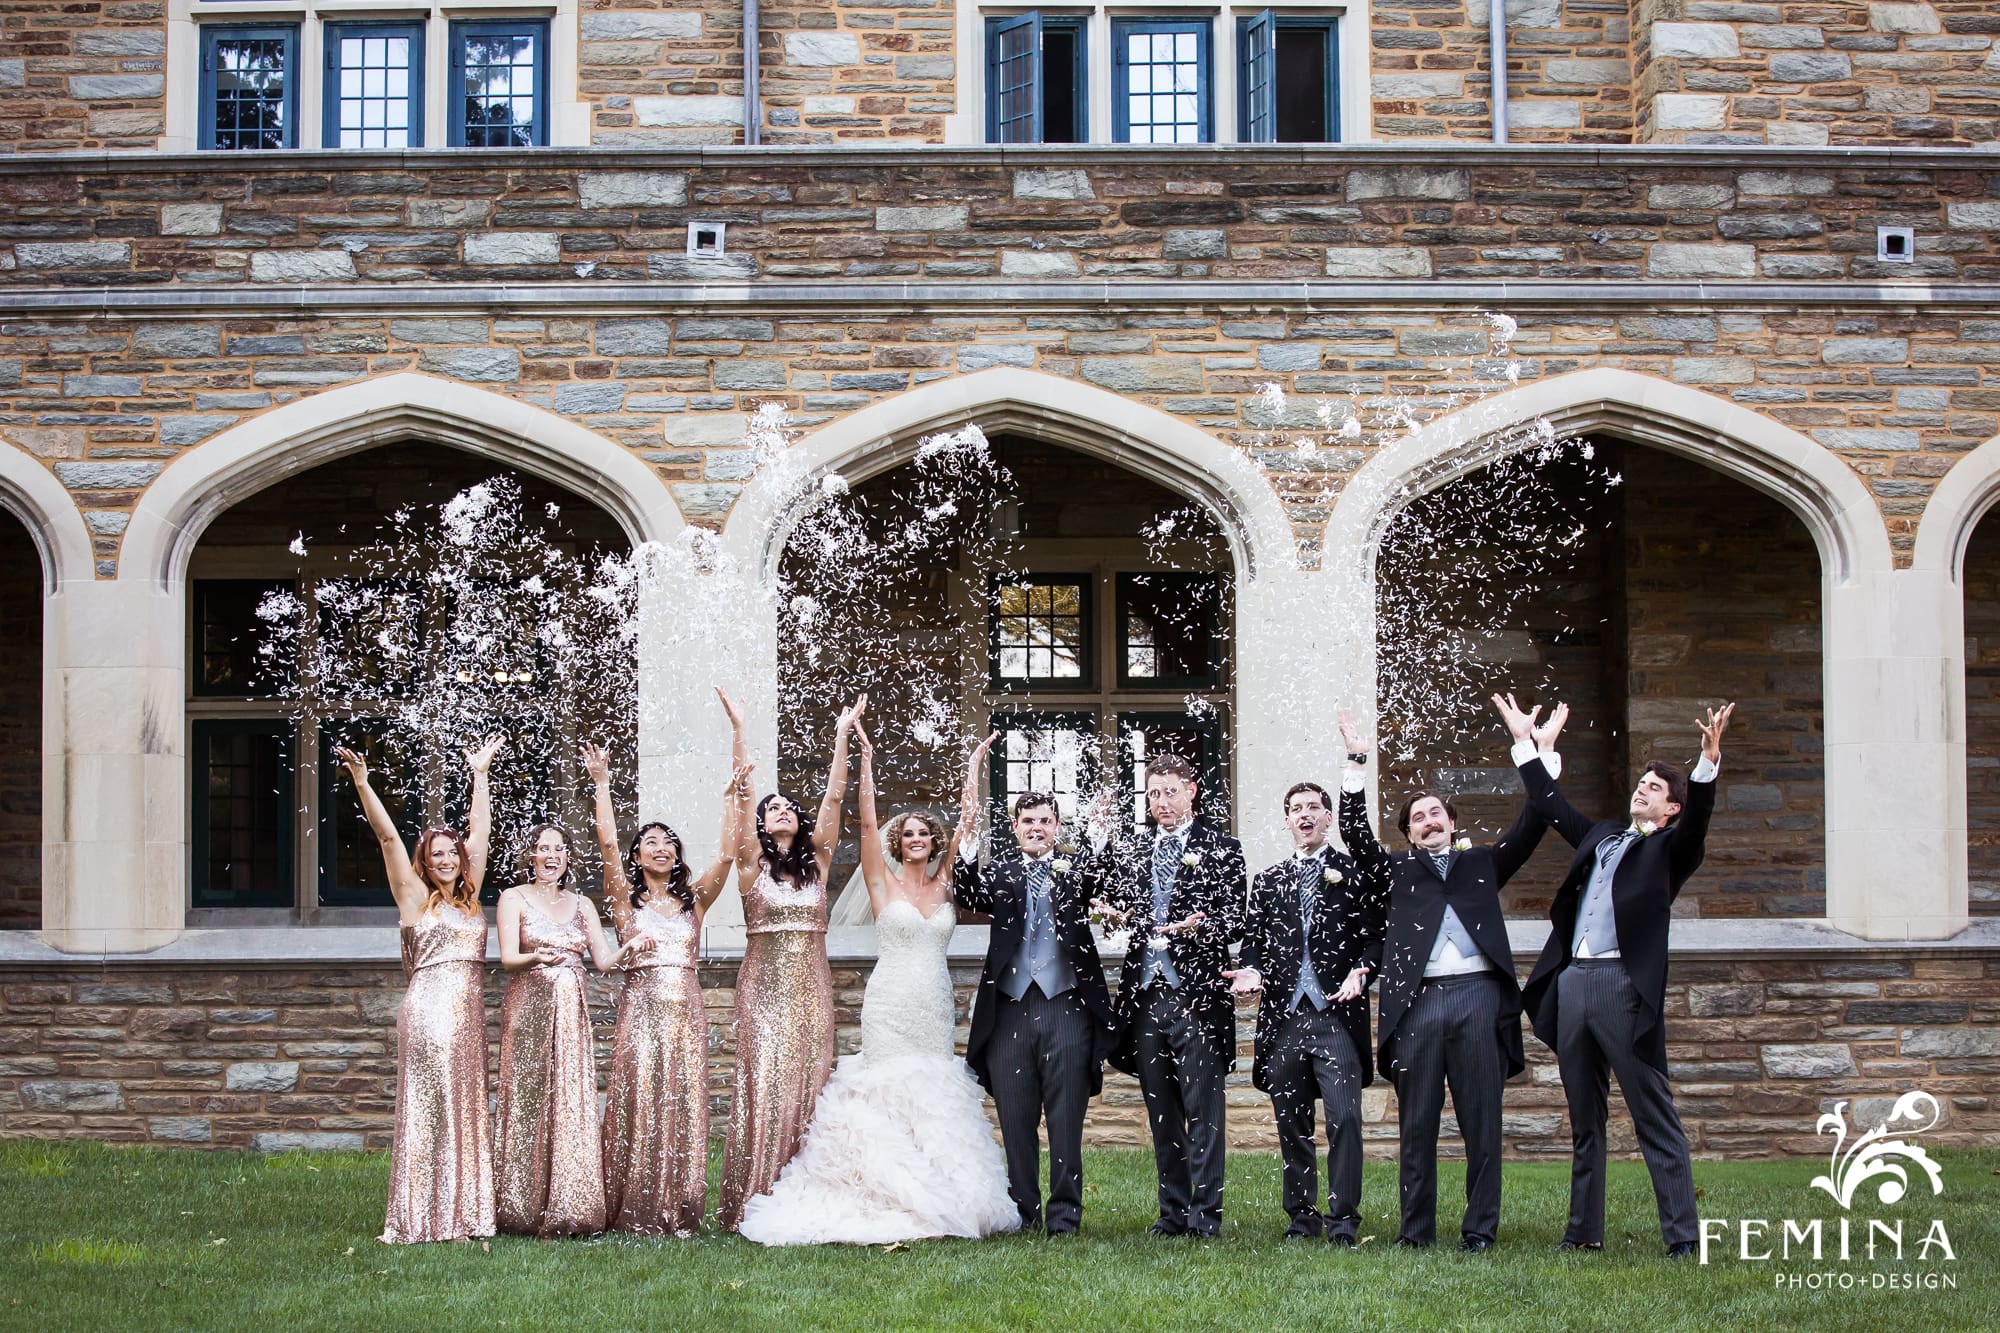 Michelle and Max throw confetti with their bridal party at Saint Andrews School in Delaware